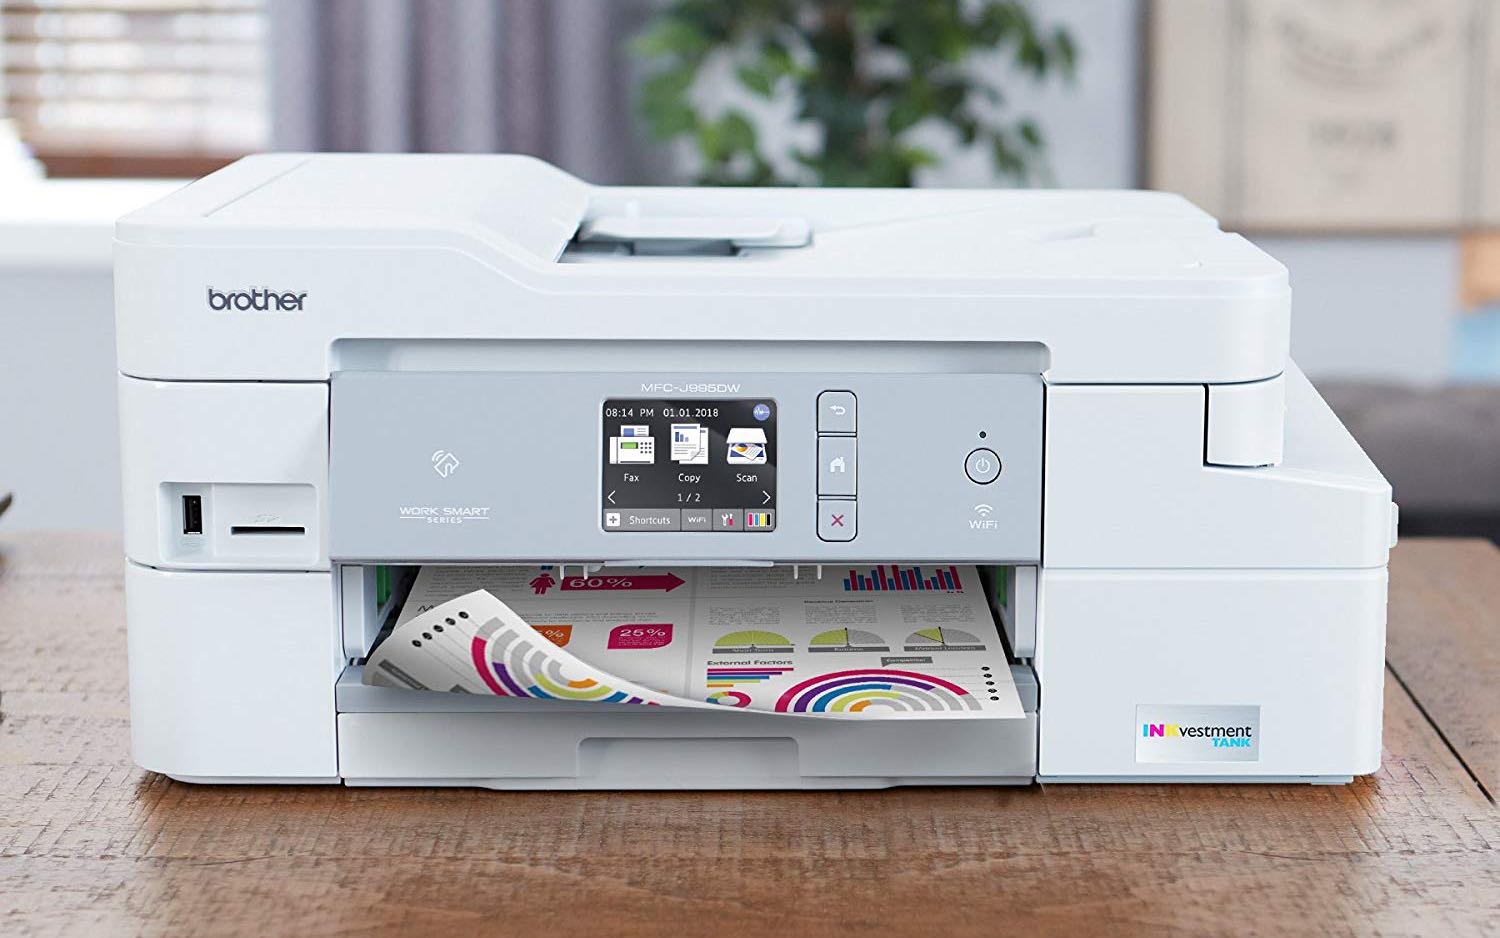 Brother MFC-J6555DW printer review: A great option for the small